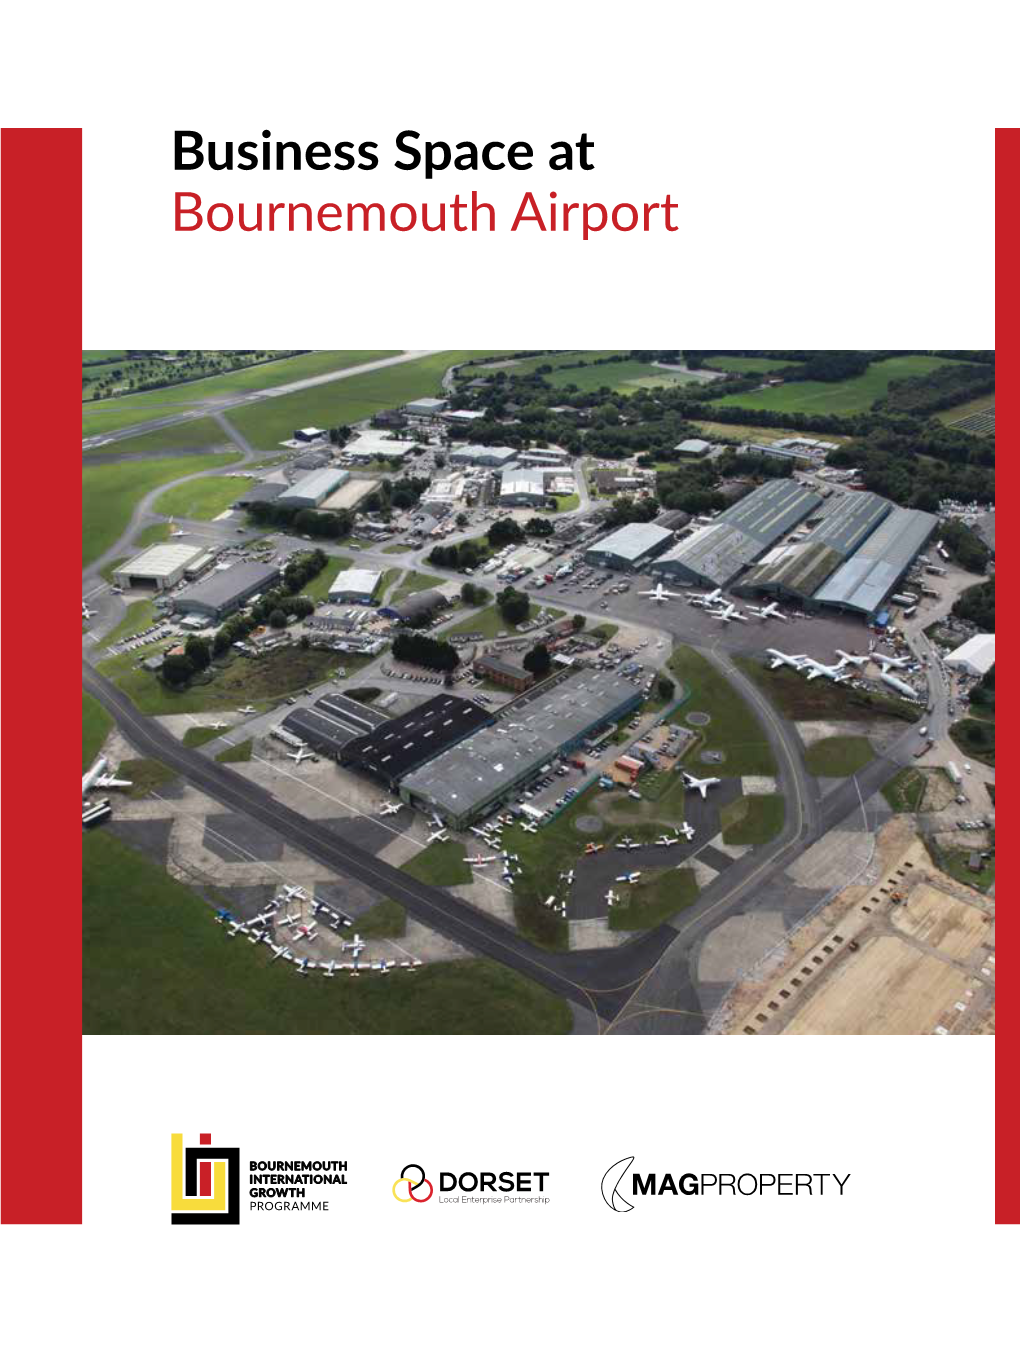 Business Space at Bournemouth Airport